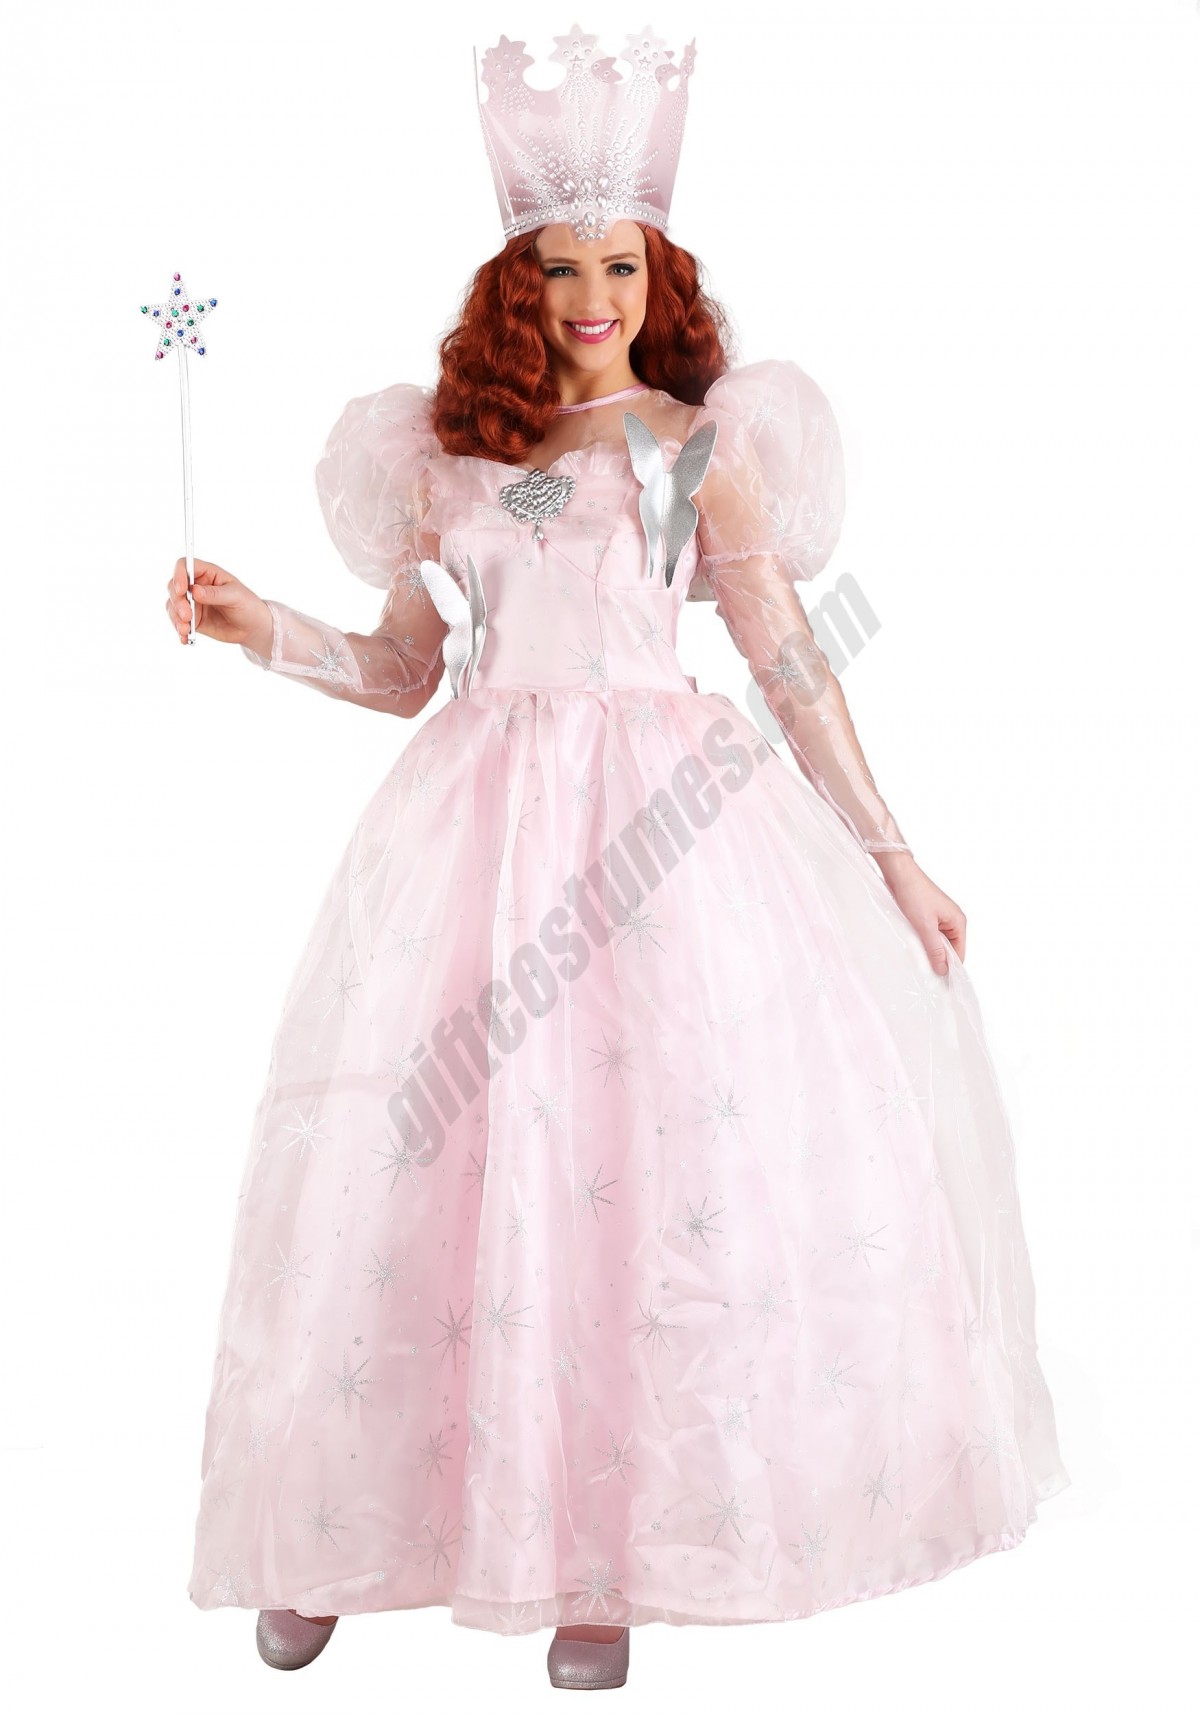 Deluxe Wizard of Oz Glinda the Good Witch Plus Size Women's Costume - -0